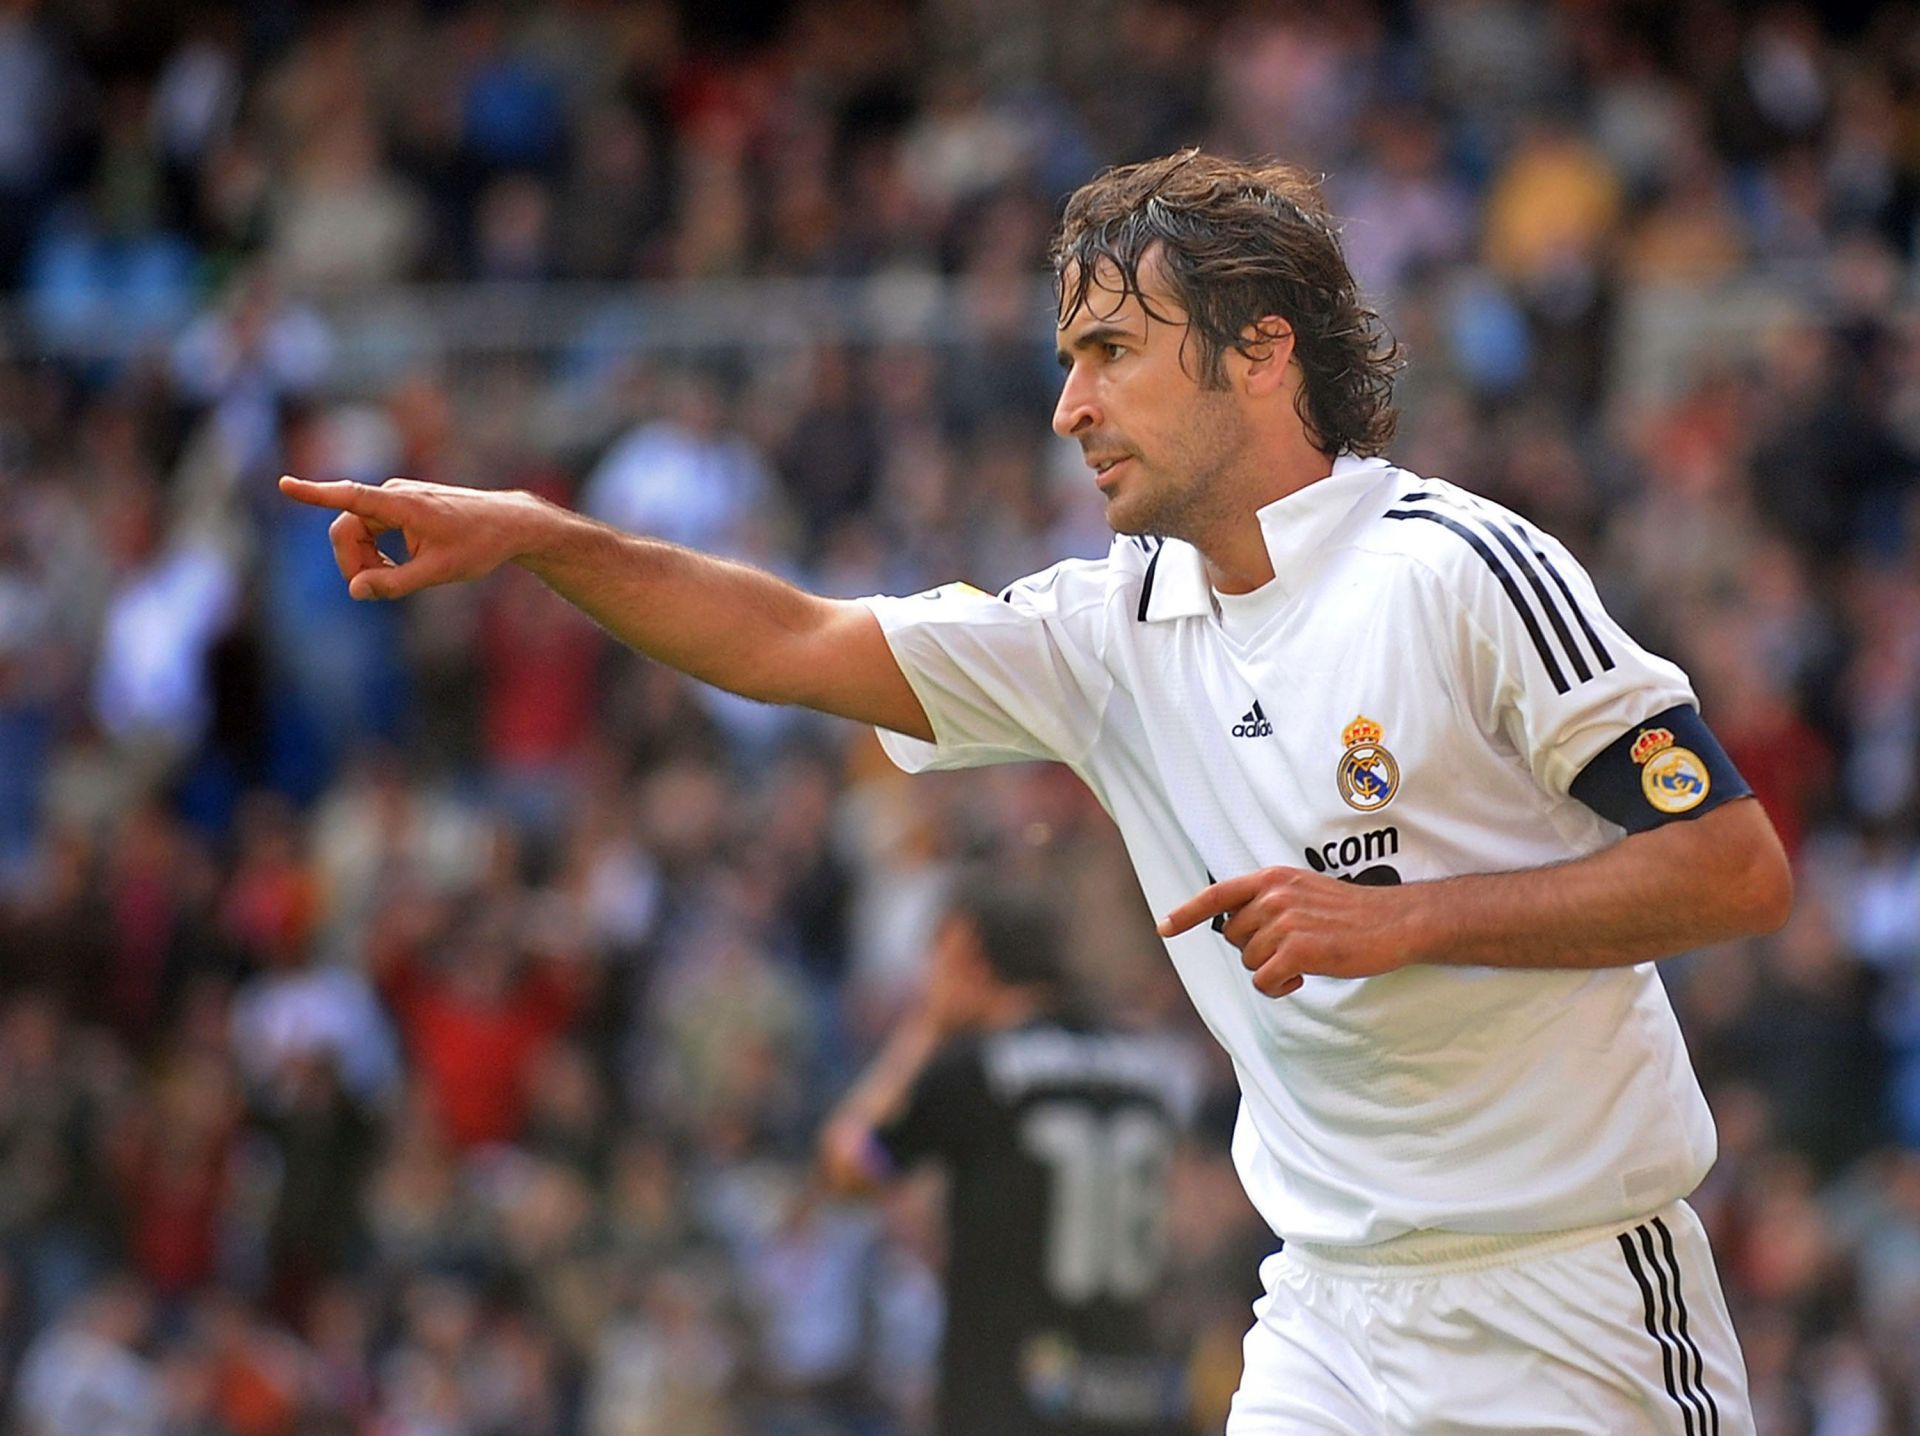 Real Madrid legend Raul Gonzalez in action